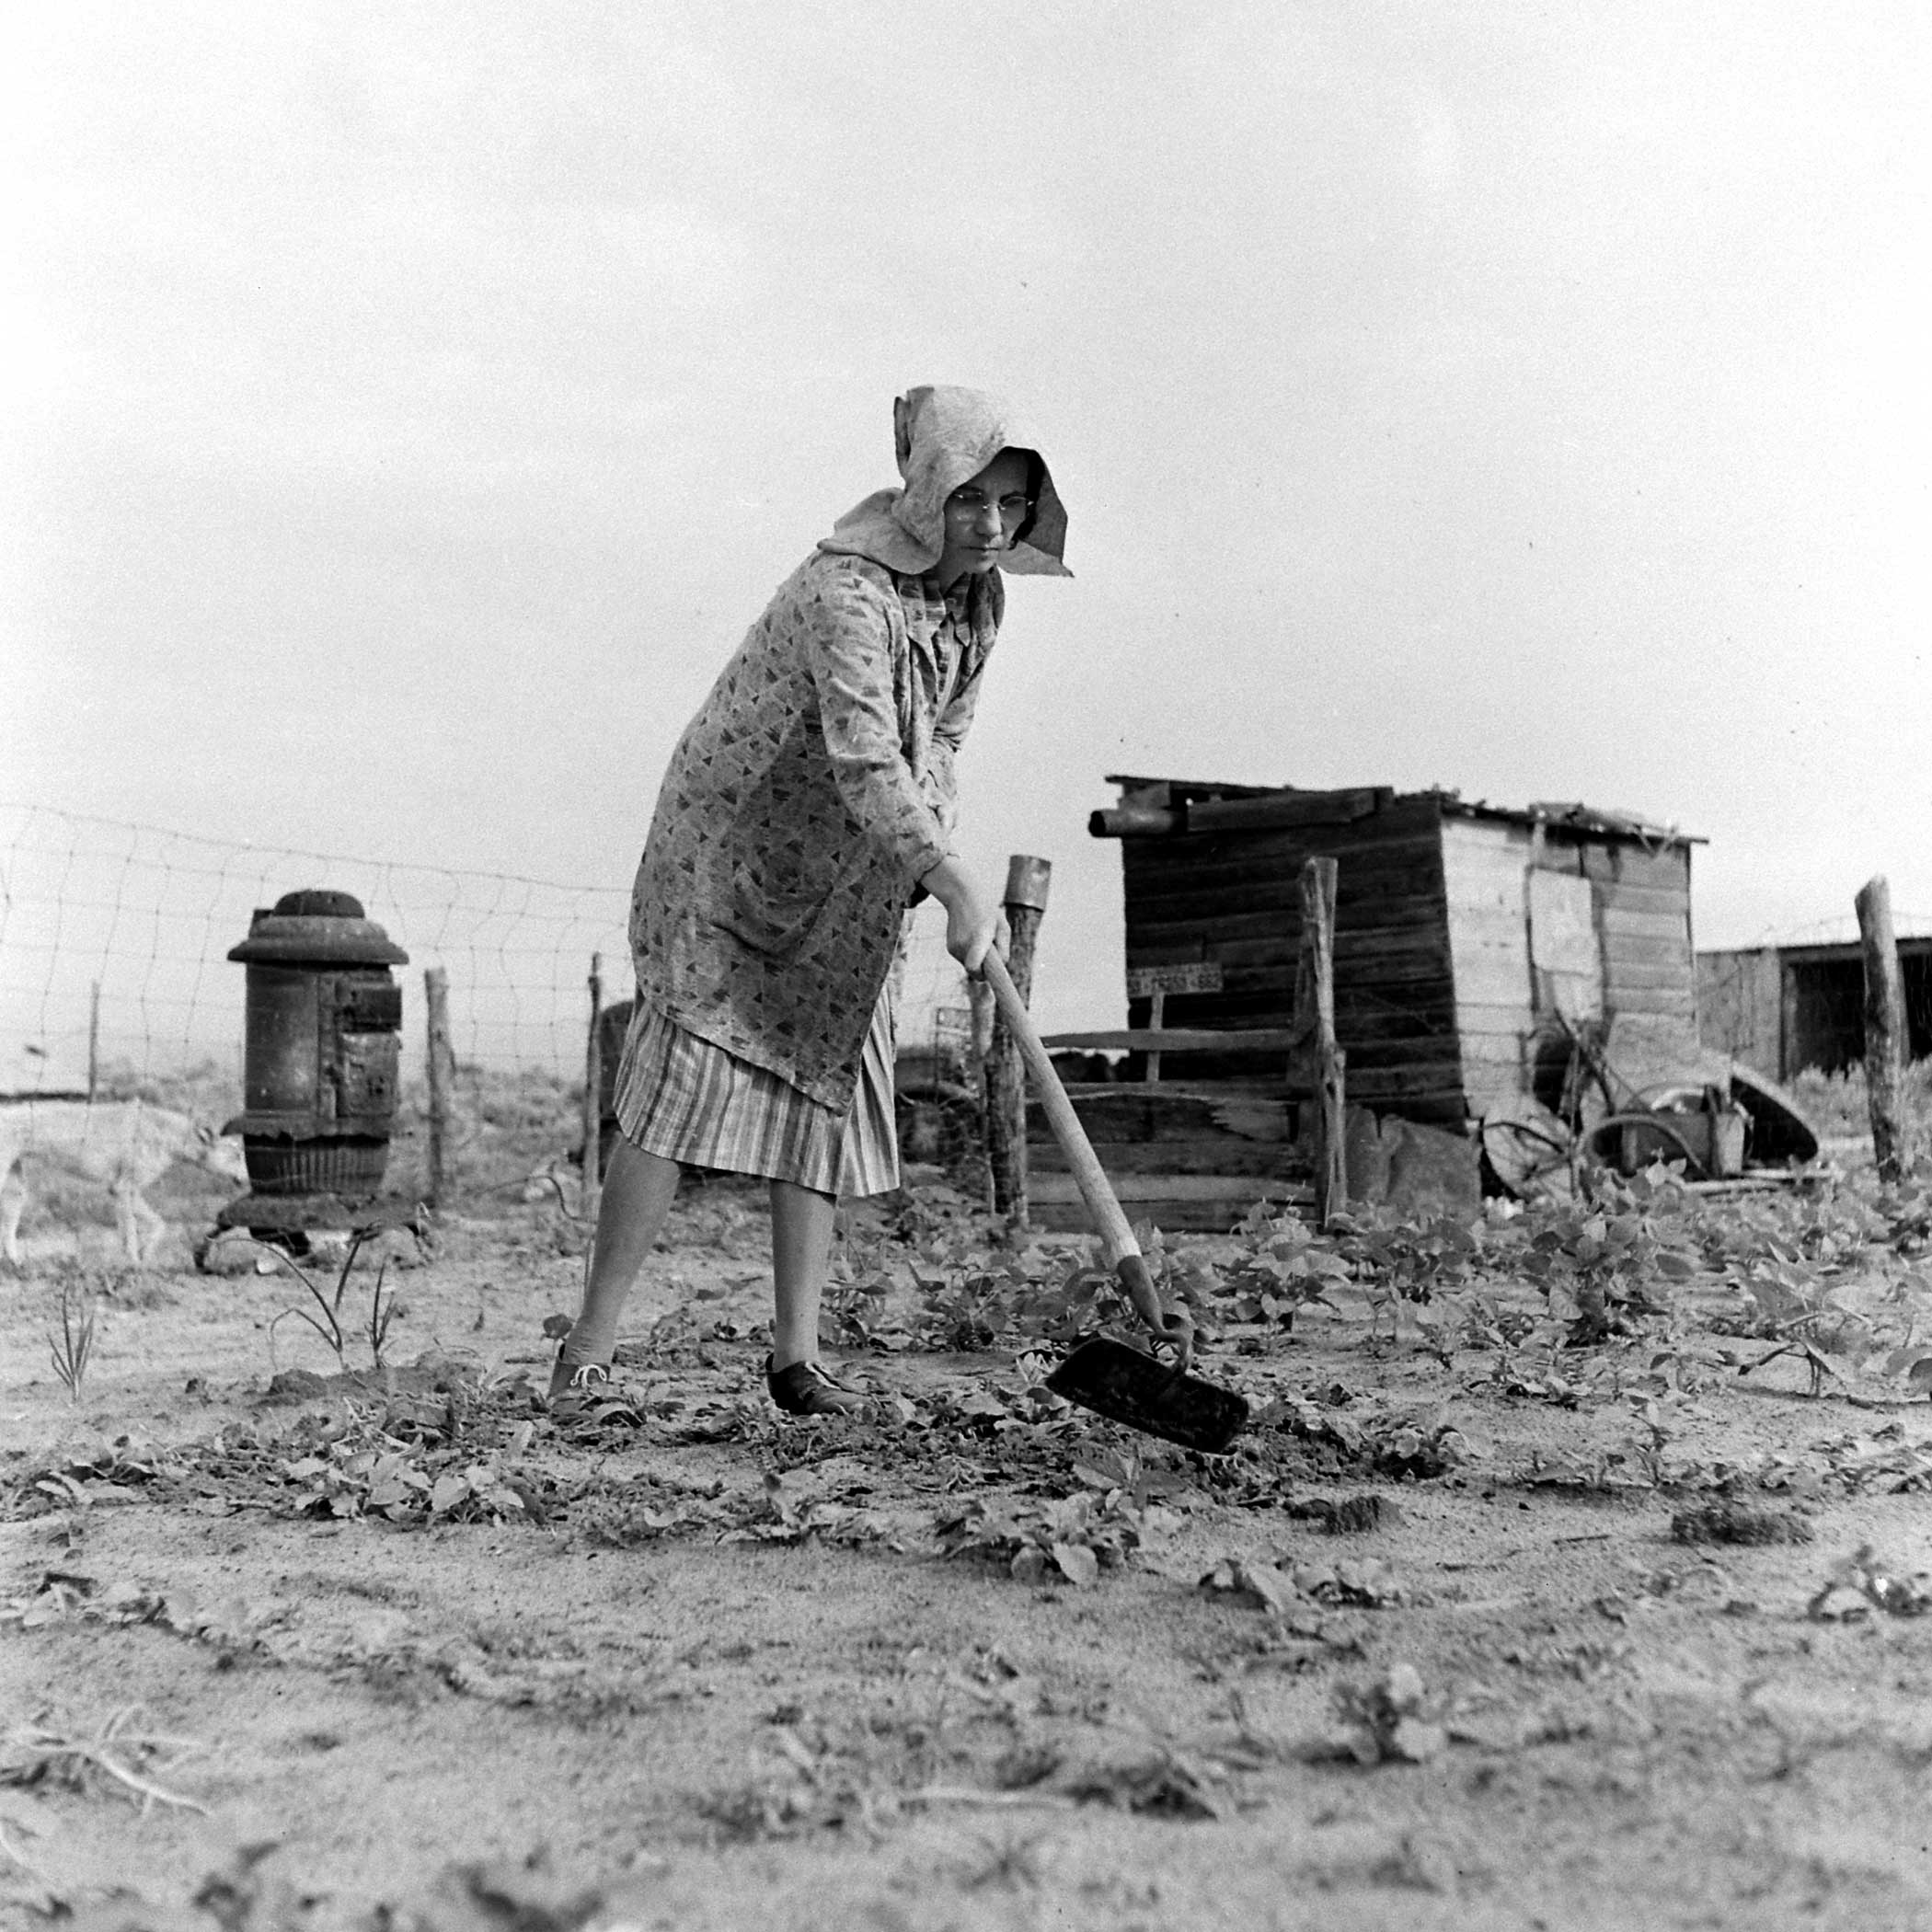 Farmer John Barnett's wife, Venus, works in her vegetable garden after a second planting, Oklahoma, 1942. A windstorm earlier in the year blew the first seedlings away.